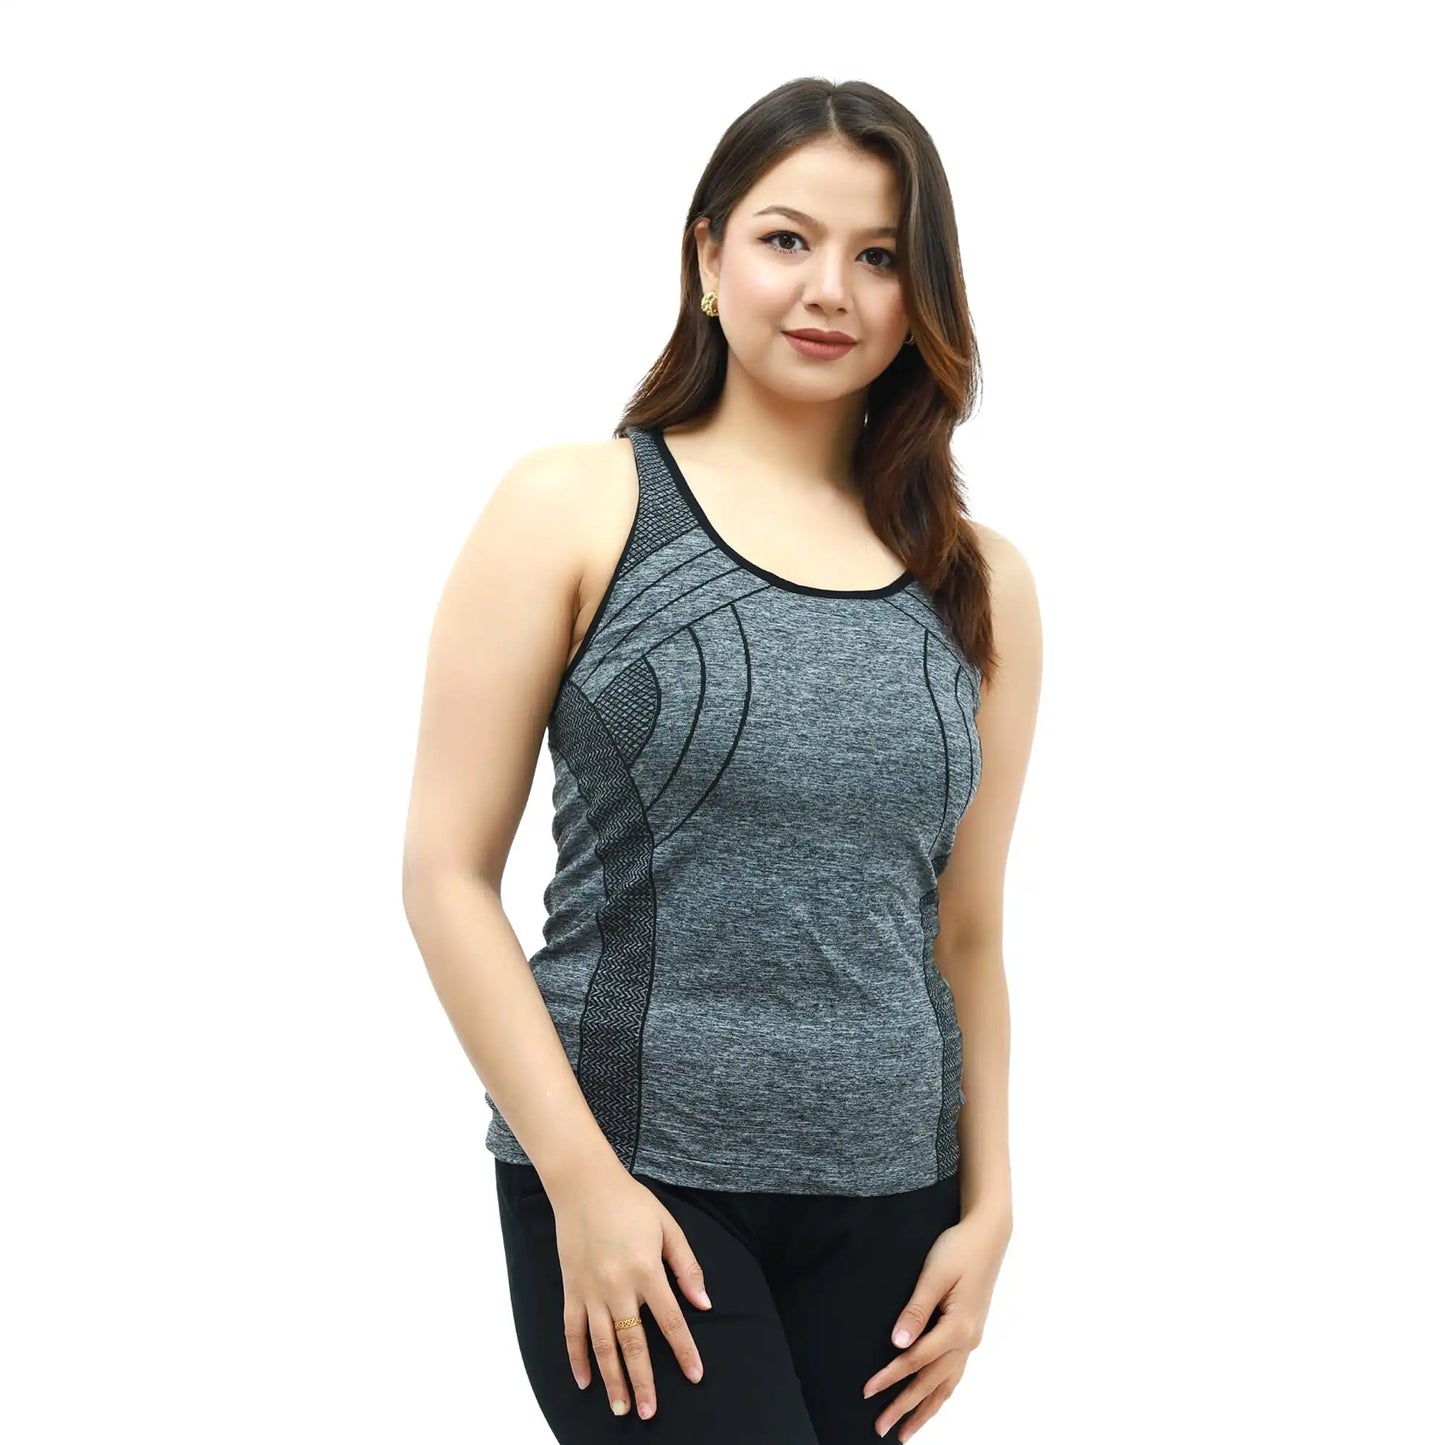 Grey Stretchable Sleeves less Printed Sport Sando For Women(SD-18)